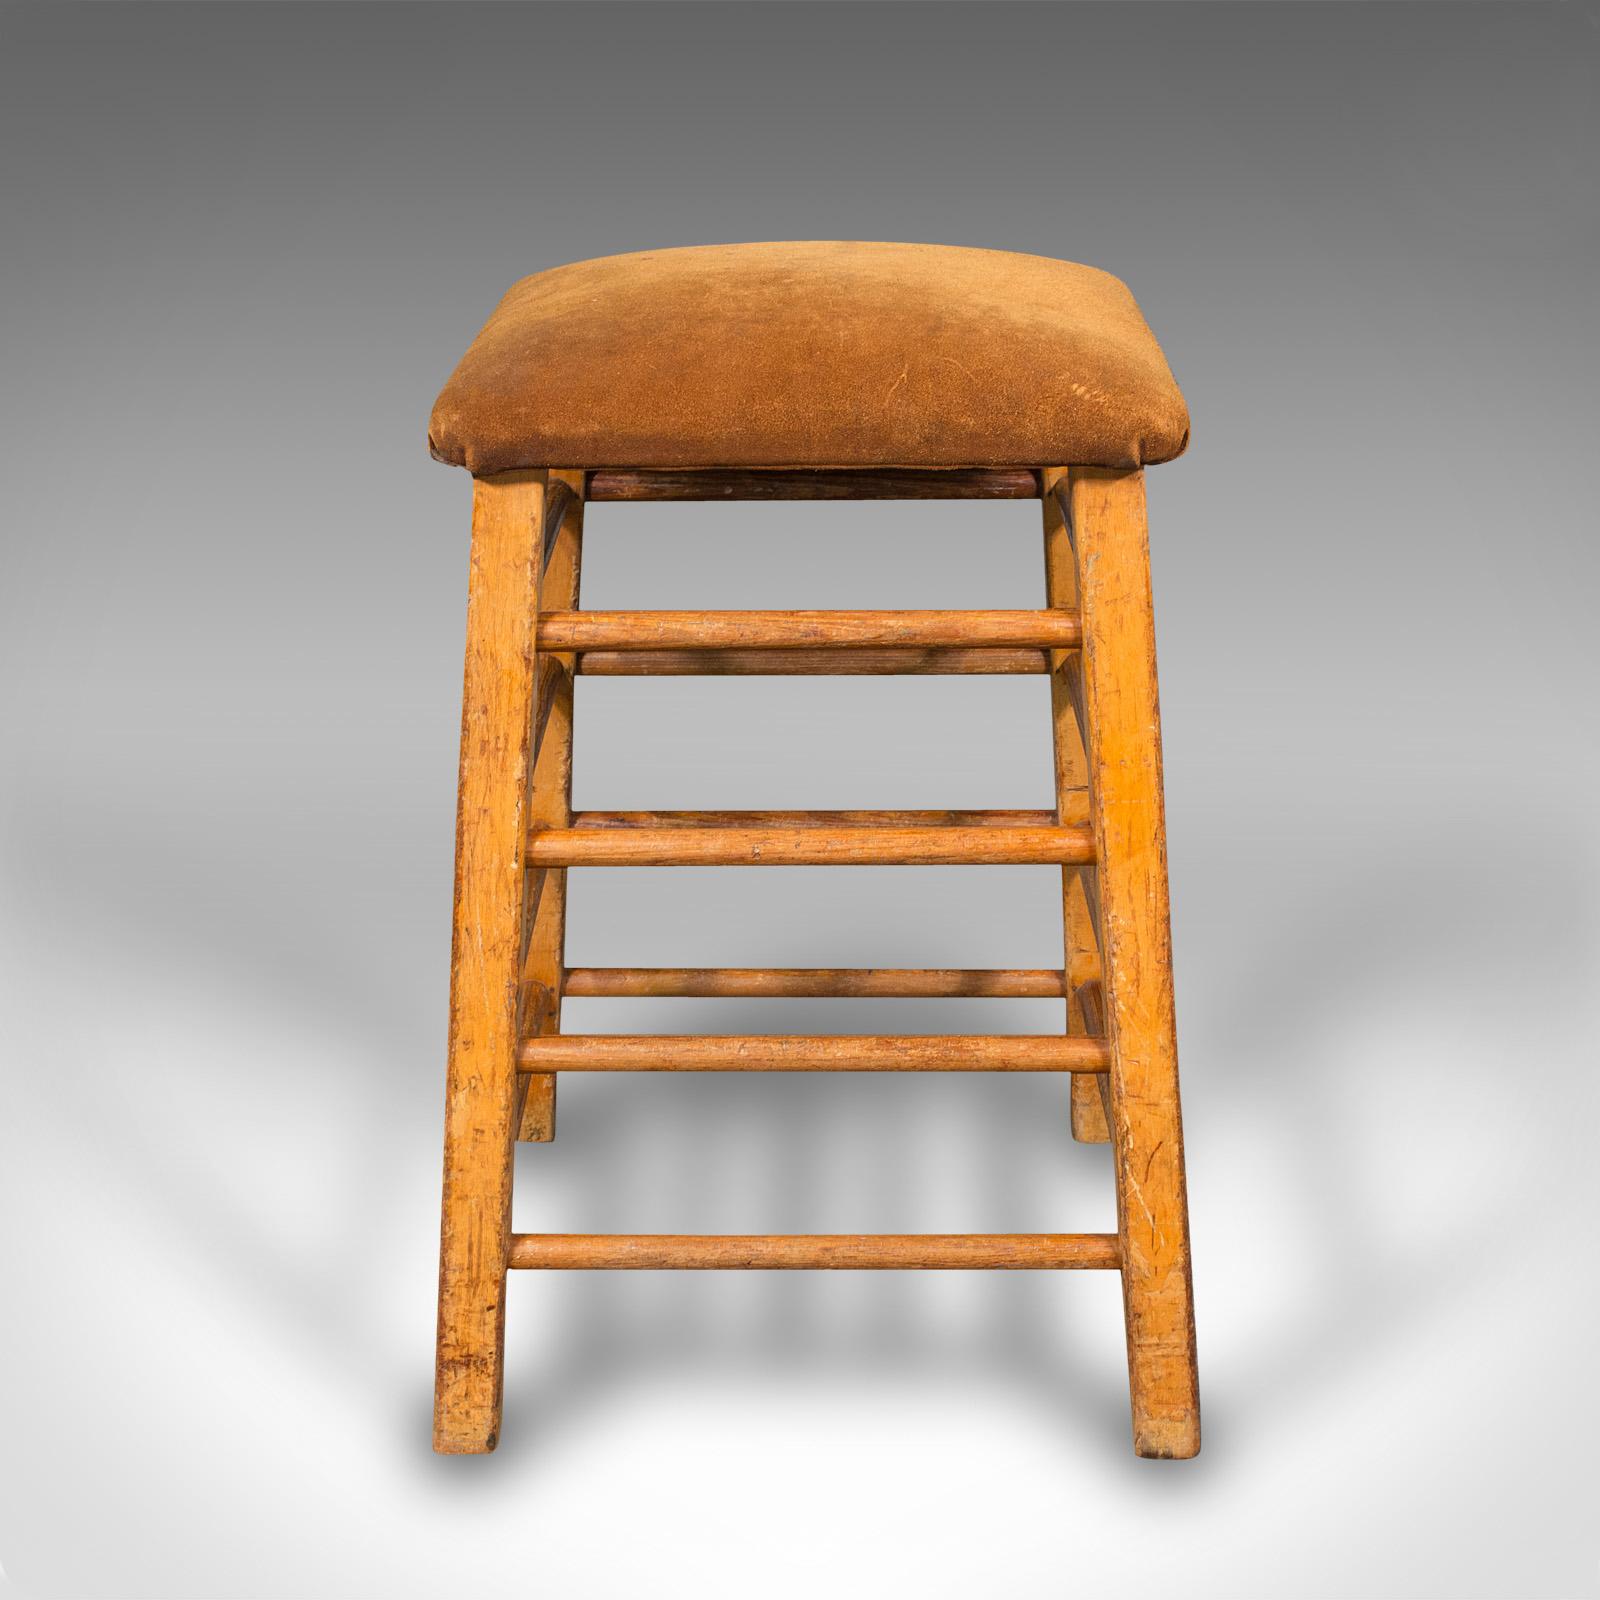 British Large Vintage Artist's Stool, English, Pitch Pine, Suede, Gym, Lab Seat, C.1960 For Sale